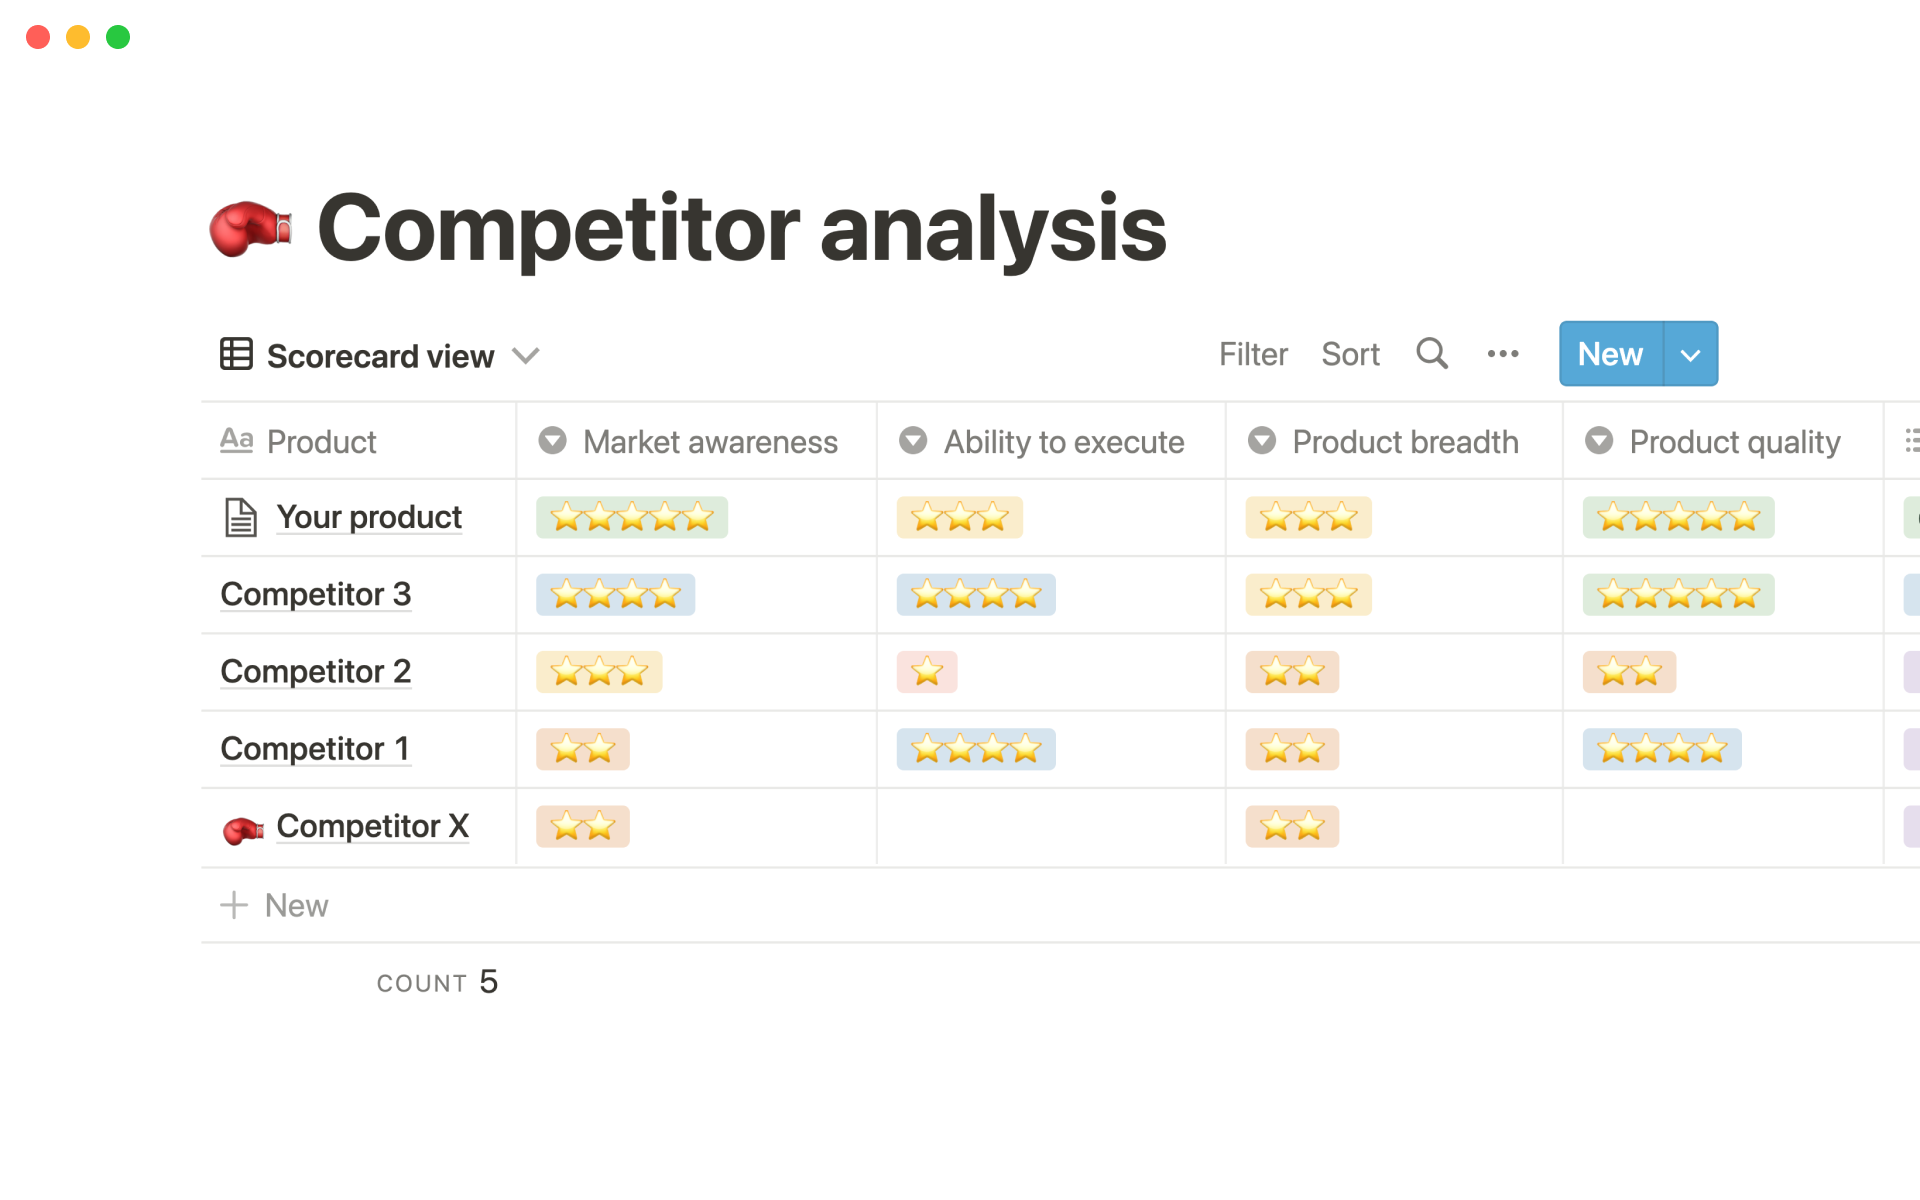 Screenshot of Top Competitive Analysis Templates for Product Analysts collection by Notion